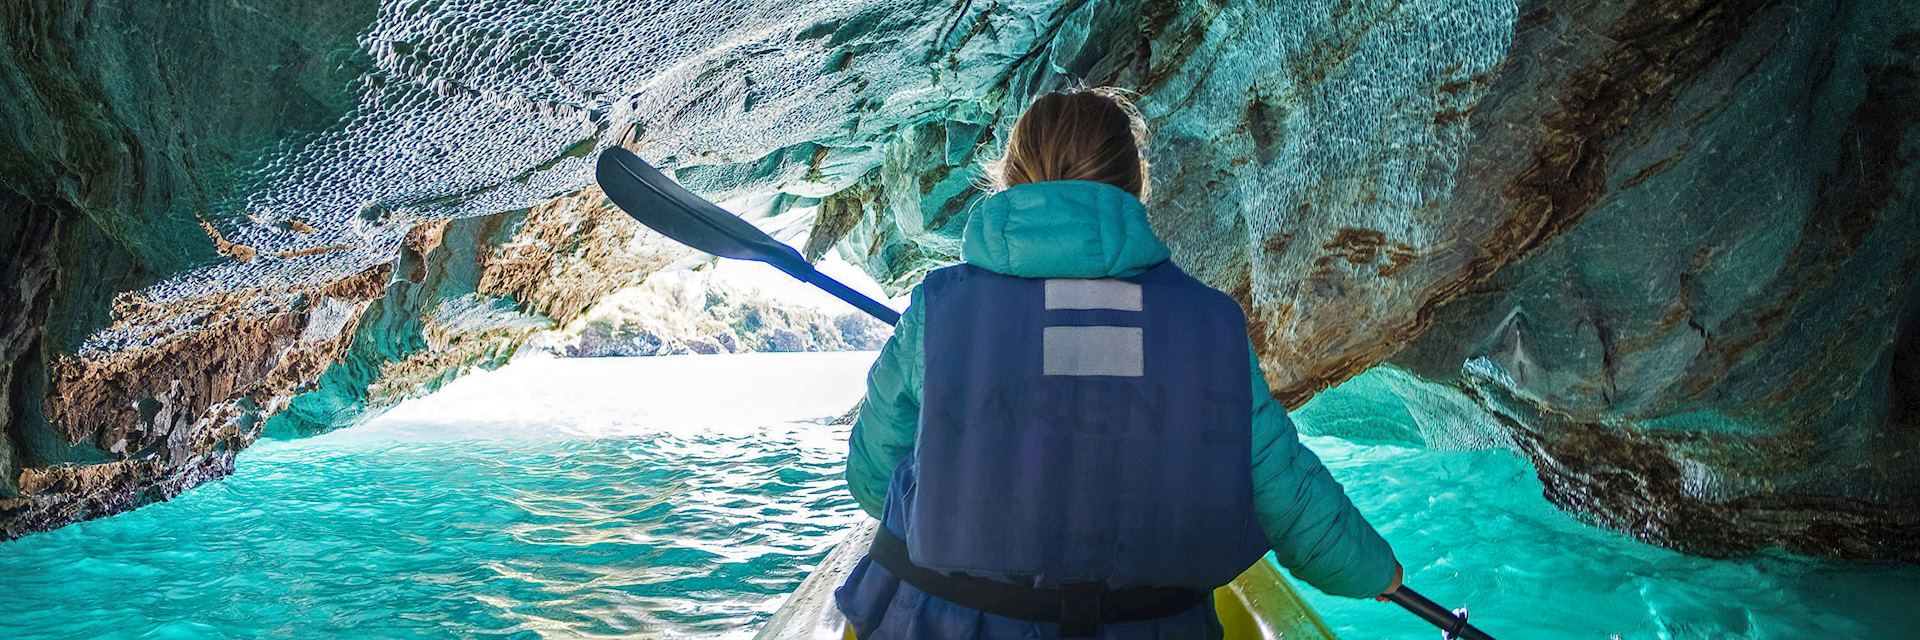 Kayaking in the Marble Caves